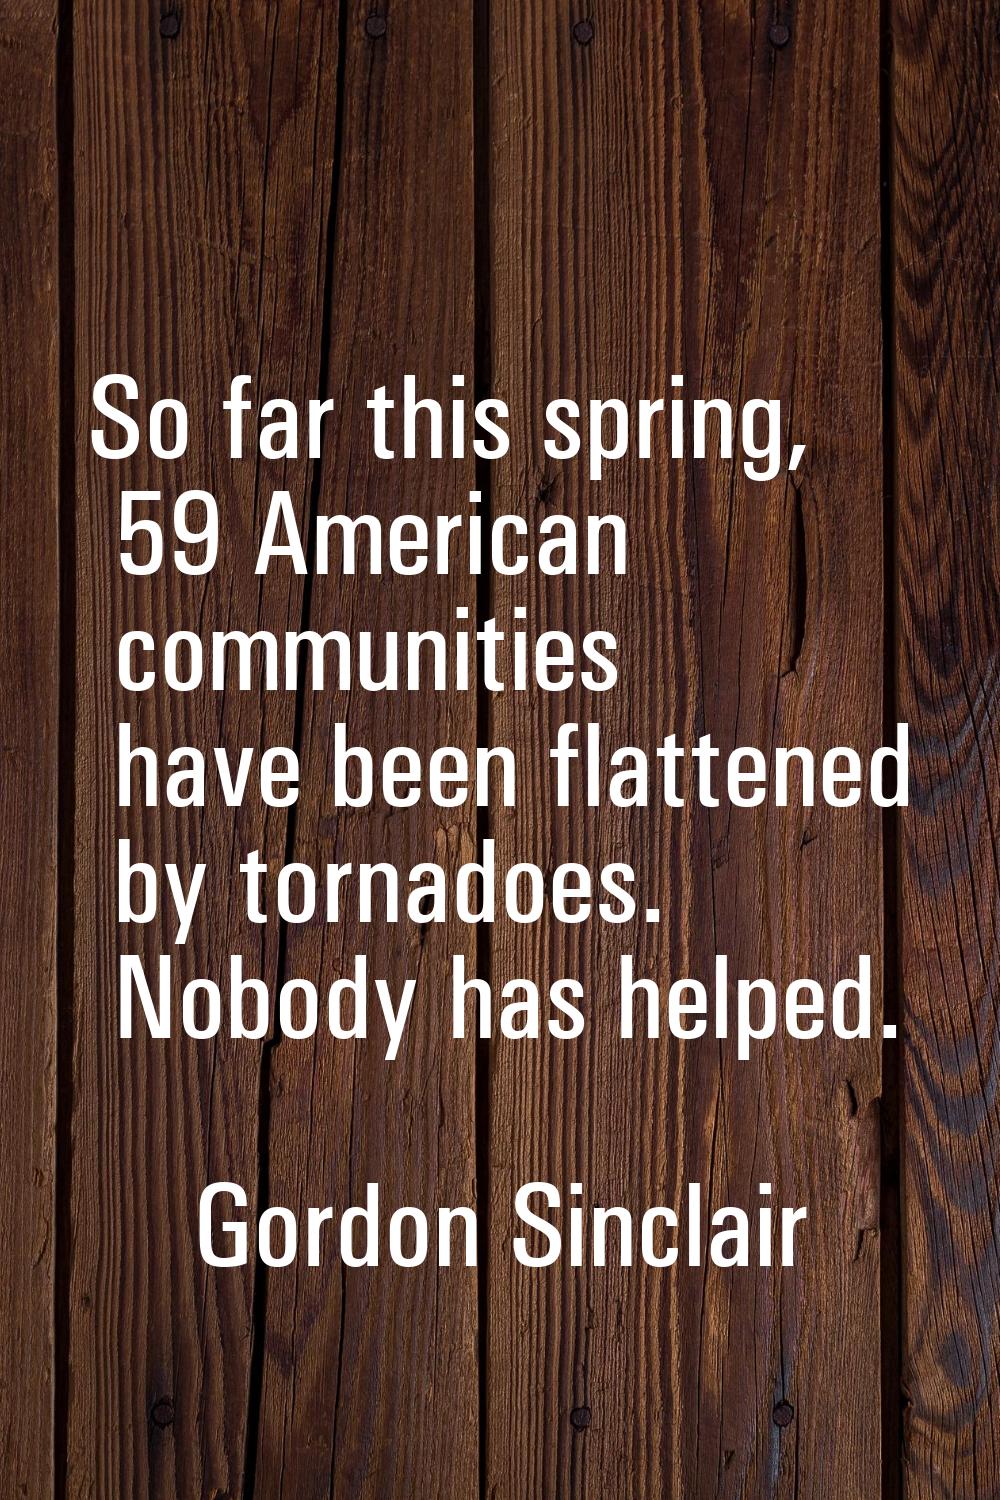 So far this spring, 59 American communities have been flattened by tornadoes. Nobody has helped.